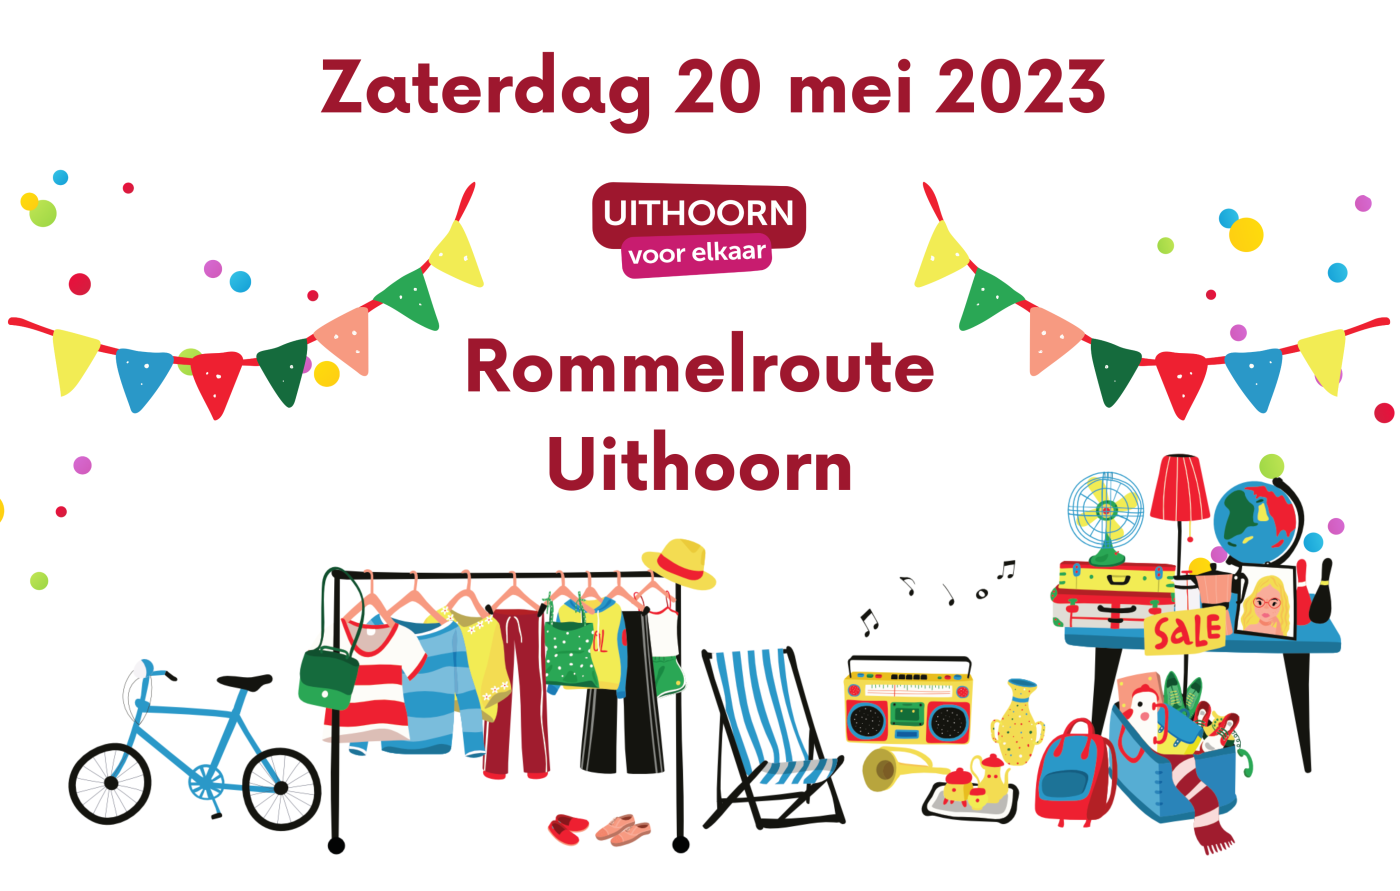 Rommelroute Uithoorn 2023